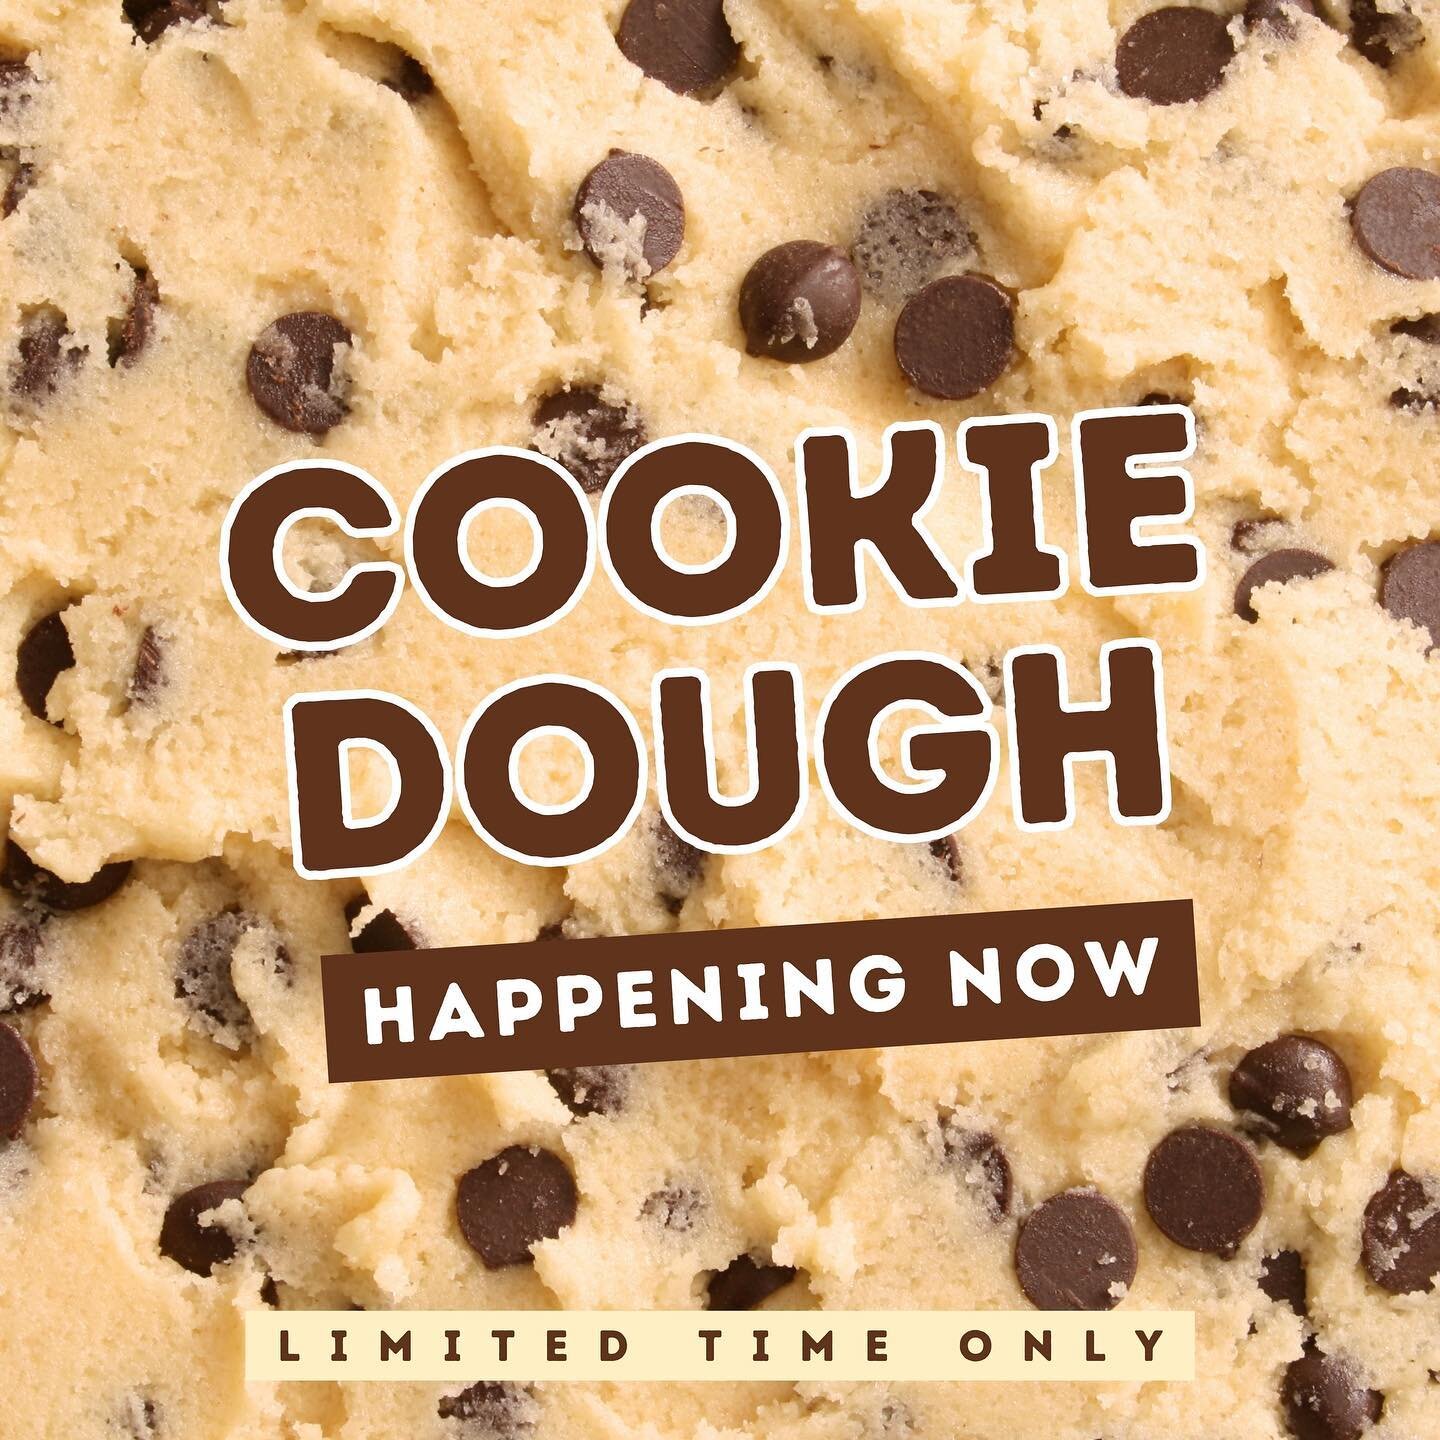 This yogurt flavor is going FAST! 🍪 Stop in today to try Cookie Dough before it&rsquo;s gone! 🧑&zwj;🍳

We&rsquo;re open 12-9pm Monday-Saturday 📍 Located on the corner of Third and Washington Street in downtown Marquette 💕

#Marquette #DowntownMa